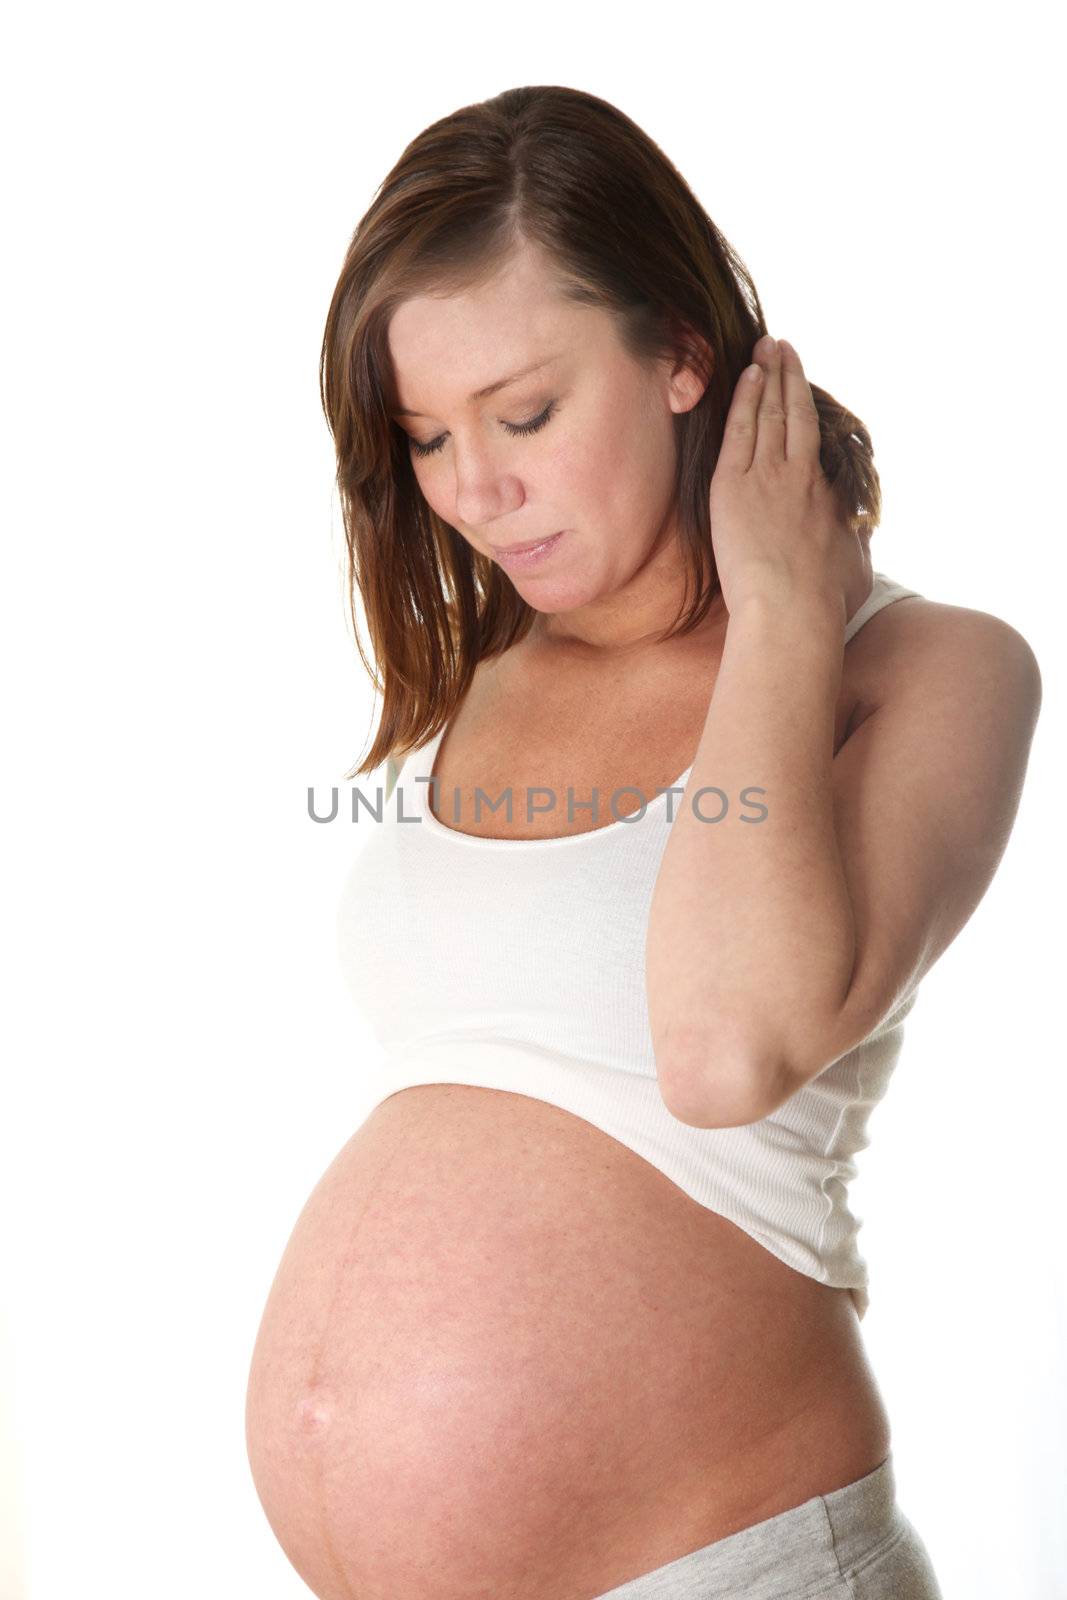 Pregnant women, young woman against a white background looks happy on her belly